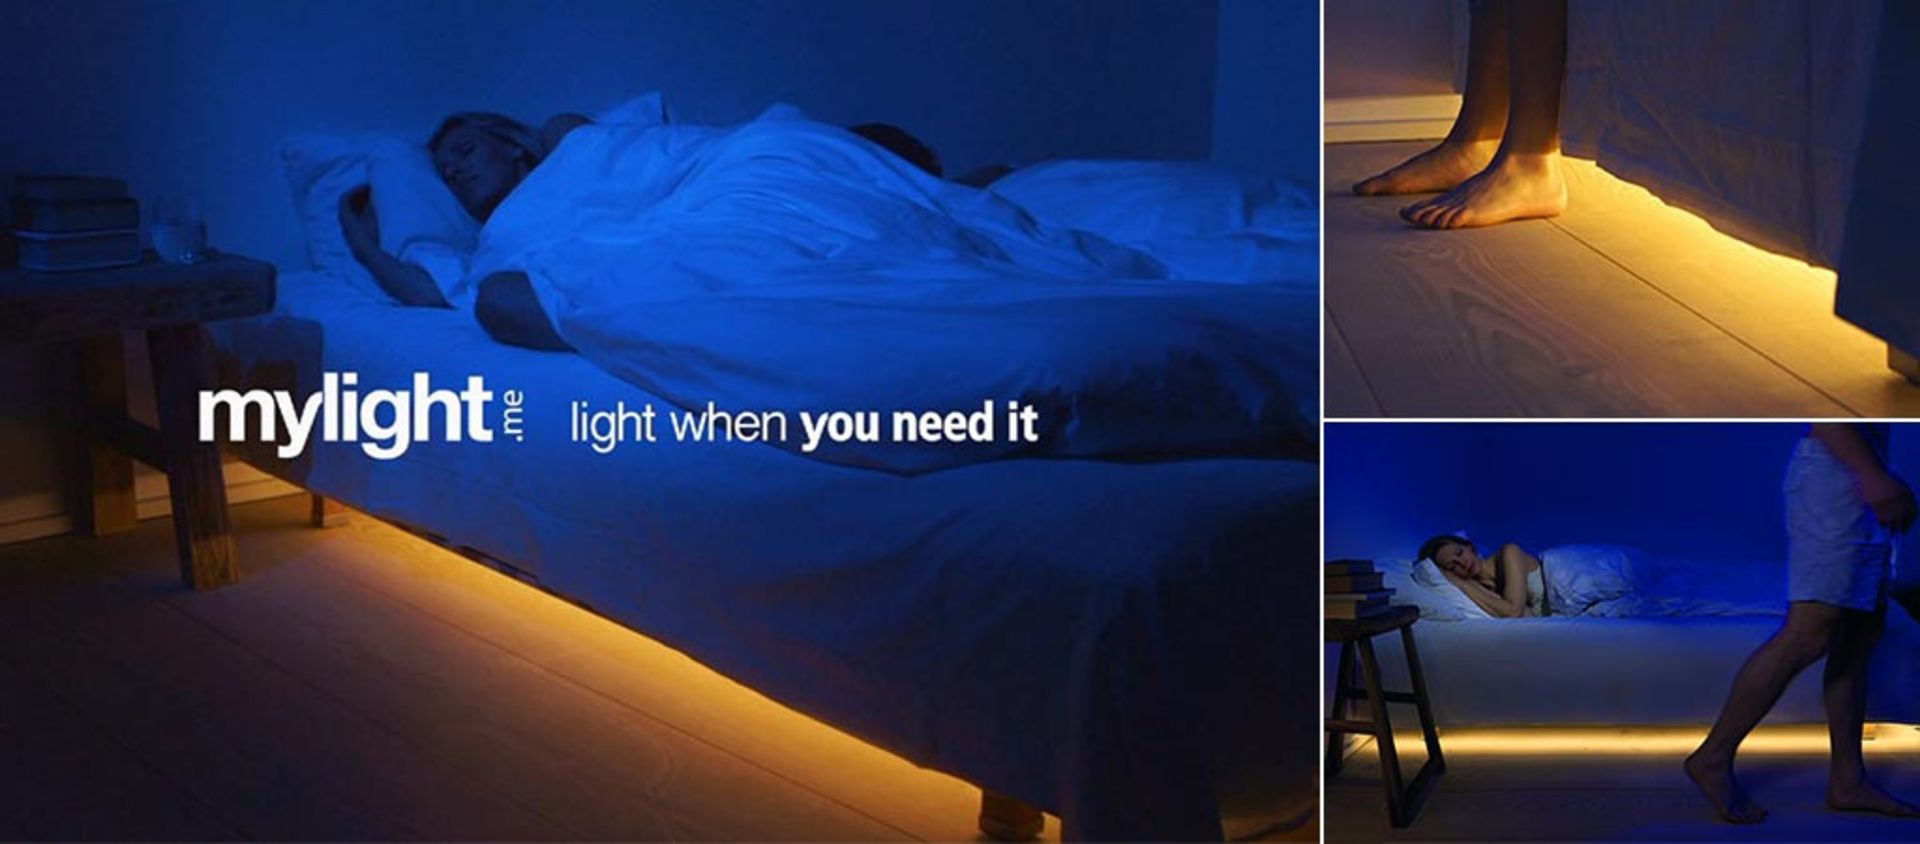 V Brand New Motion Activated Bedlight - Amazon Price £67.22 - Multi Purpose - Max. 12W - - Image 2 of 3